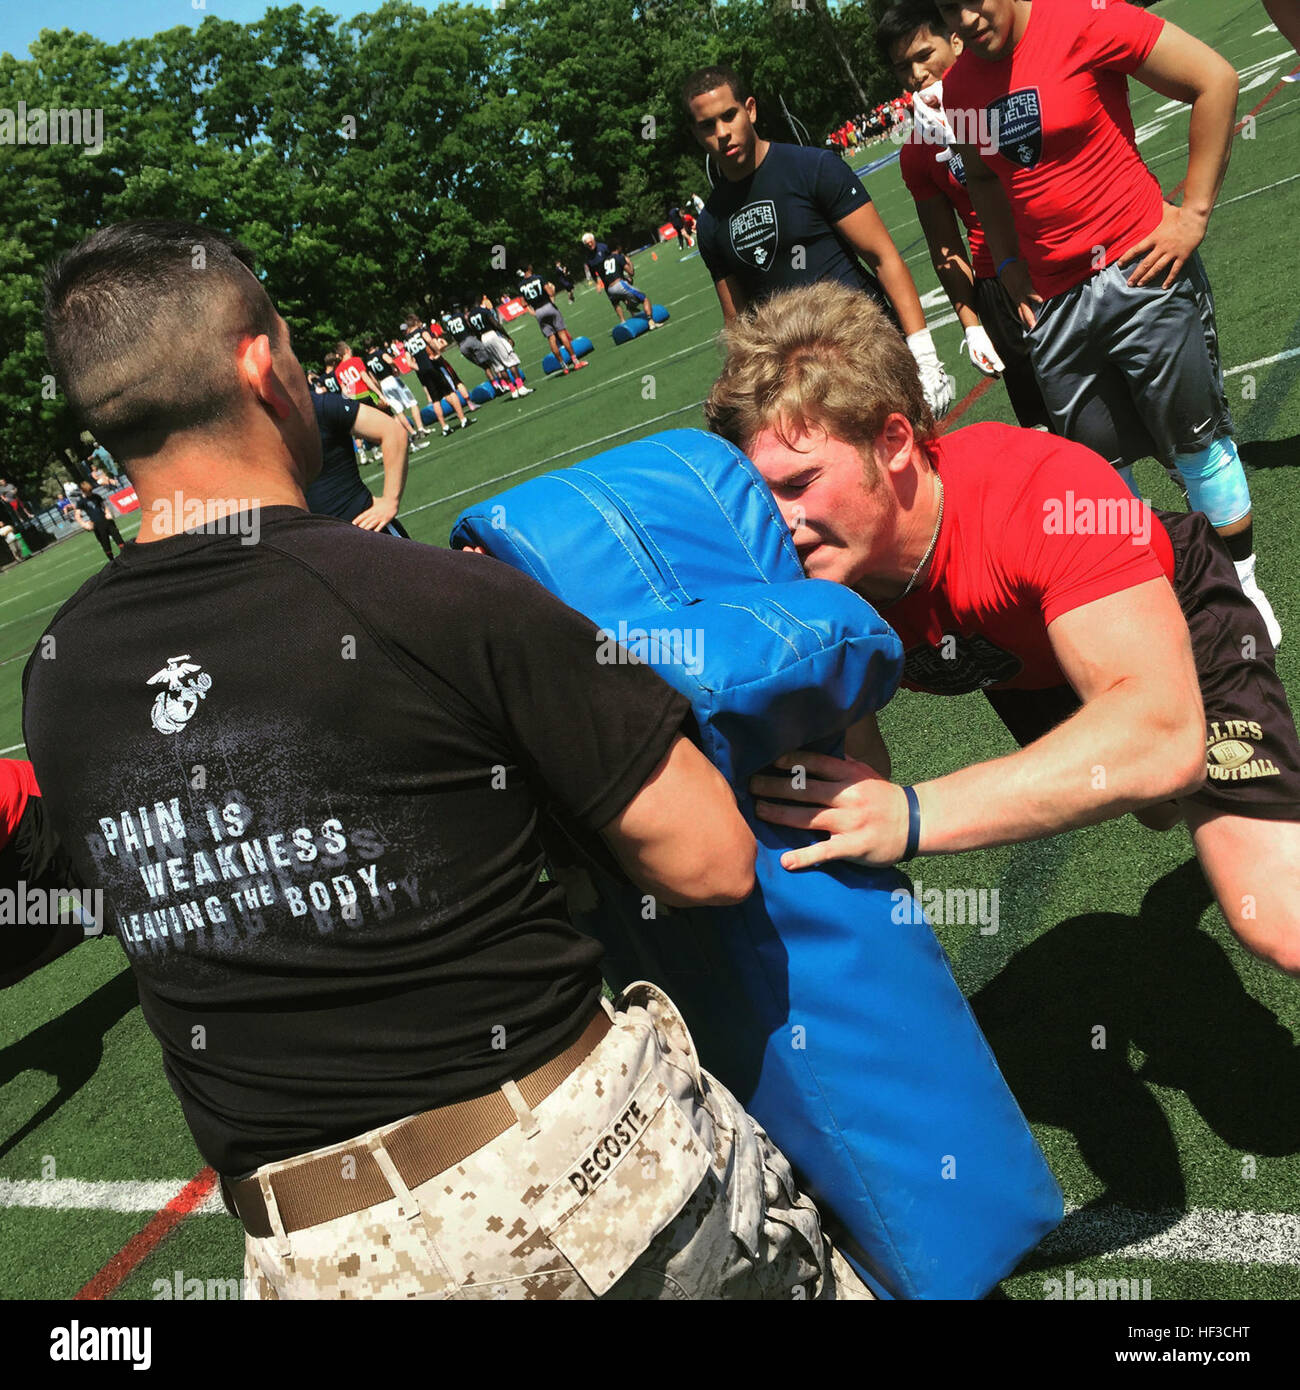 Sergeant Paul Decoste holds a body pad as high school football players rehearse offensive drills during the Semper Fidelis All-American Camp at St. John Preparatory High School in Danvers, Massachusetts, June 7. Nearly 200 top football players from high schools throughout the New England states, including New York, Pennsylvania and New Jersey, received training from the NFL and college football coaches while fighting for a spot to play in the 2016 Semper Fidelis All-American Bowl game in California. Decoste is a canvassing recruiter for Recruiting Substation Lawrence, Mass., Recruiting Station Stock Photo